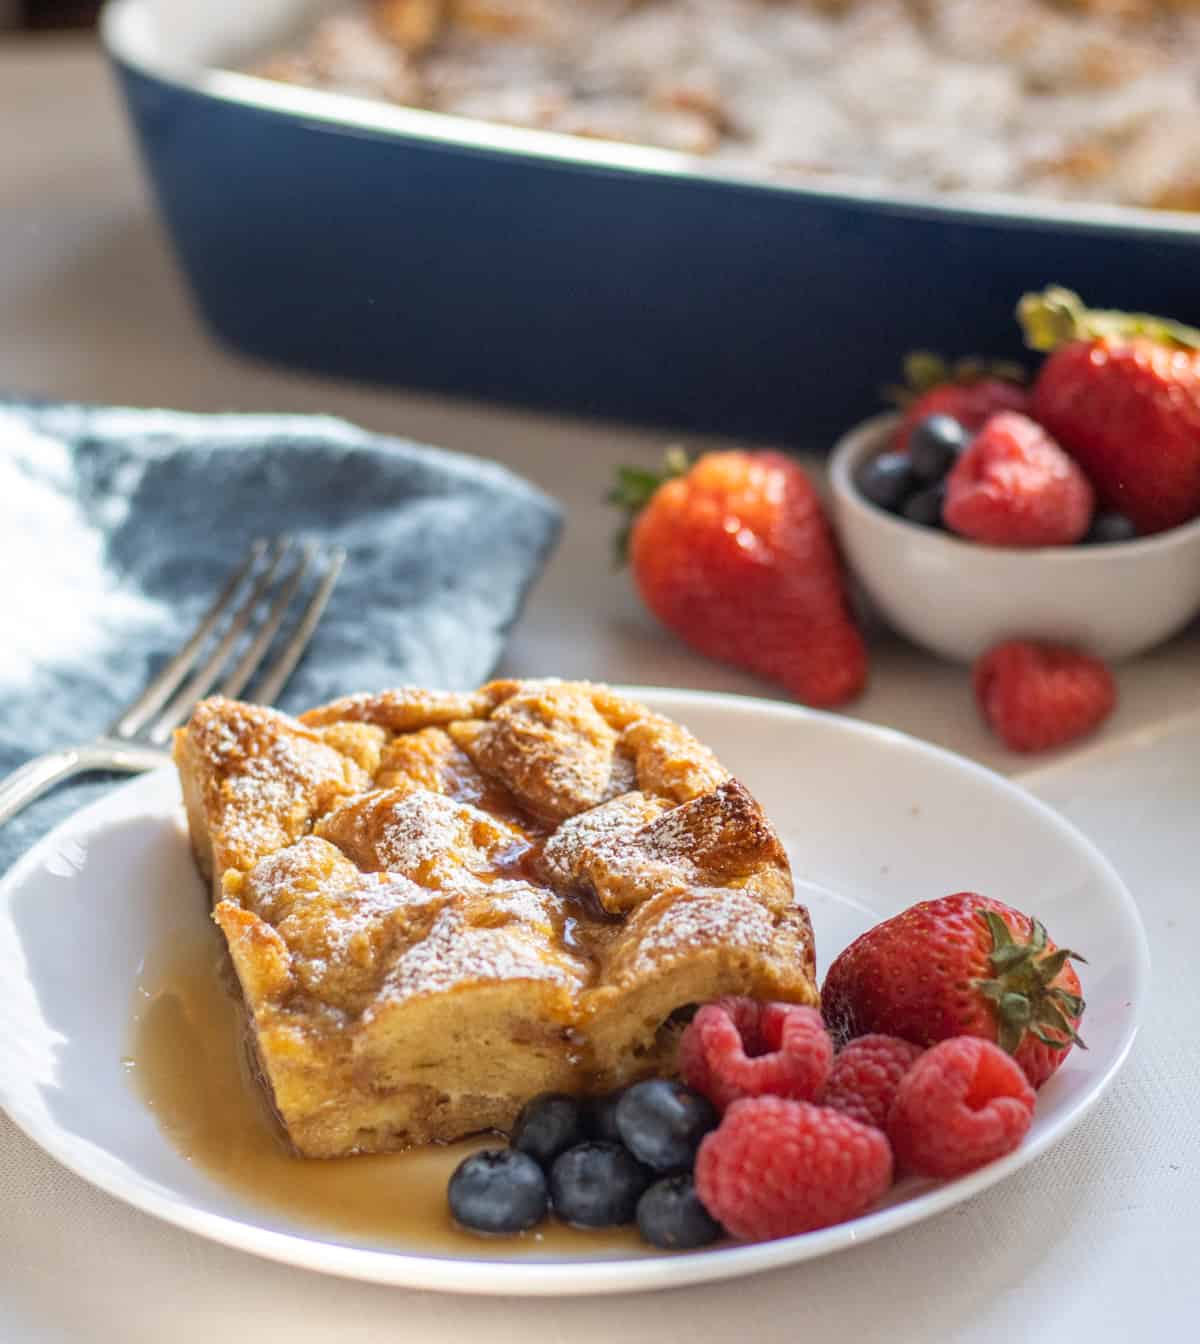 Slice of French toast casserole on a plate with mixed berries and the baking dish in the background next to more berries.